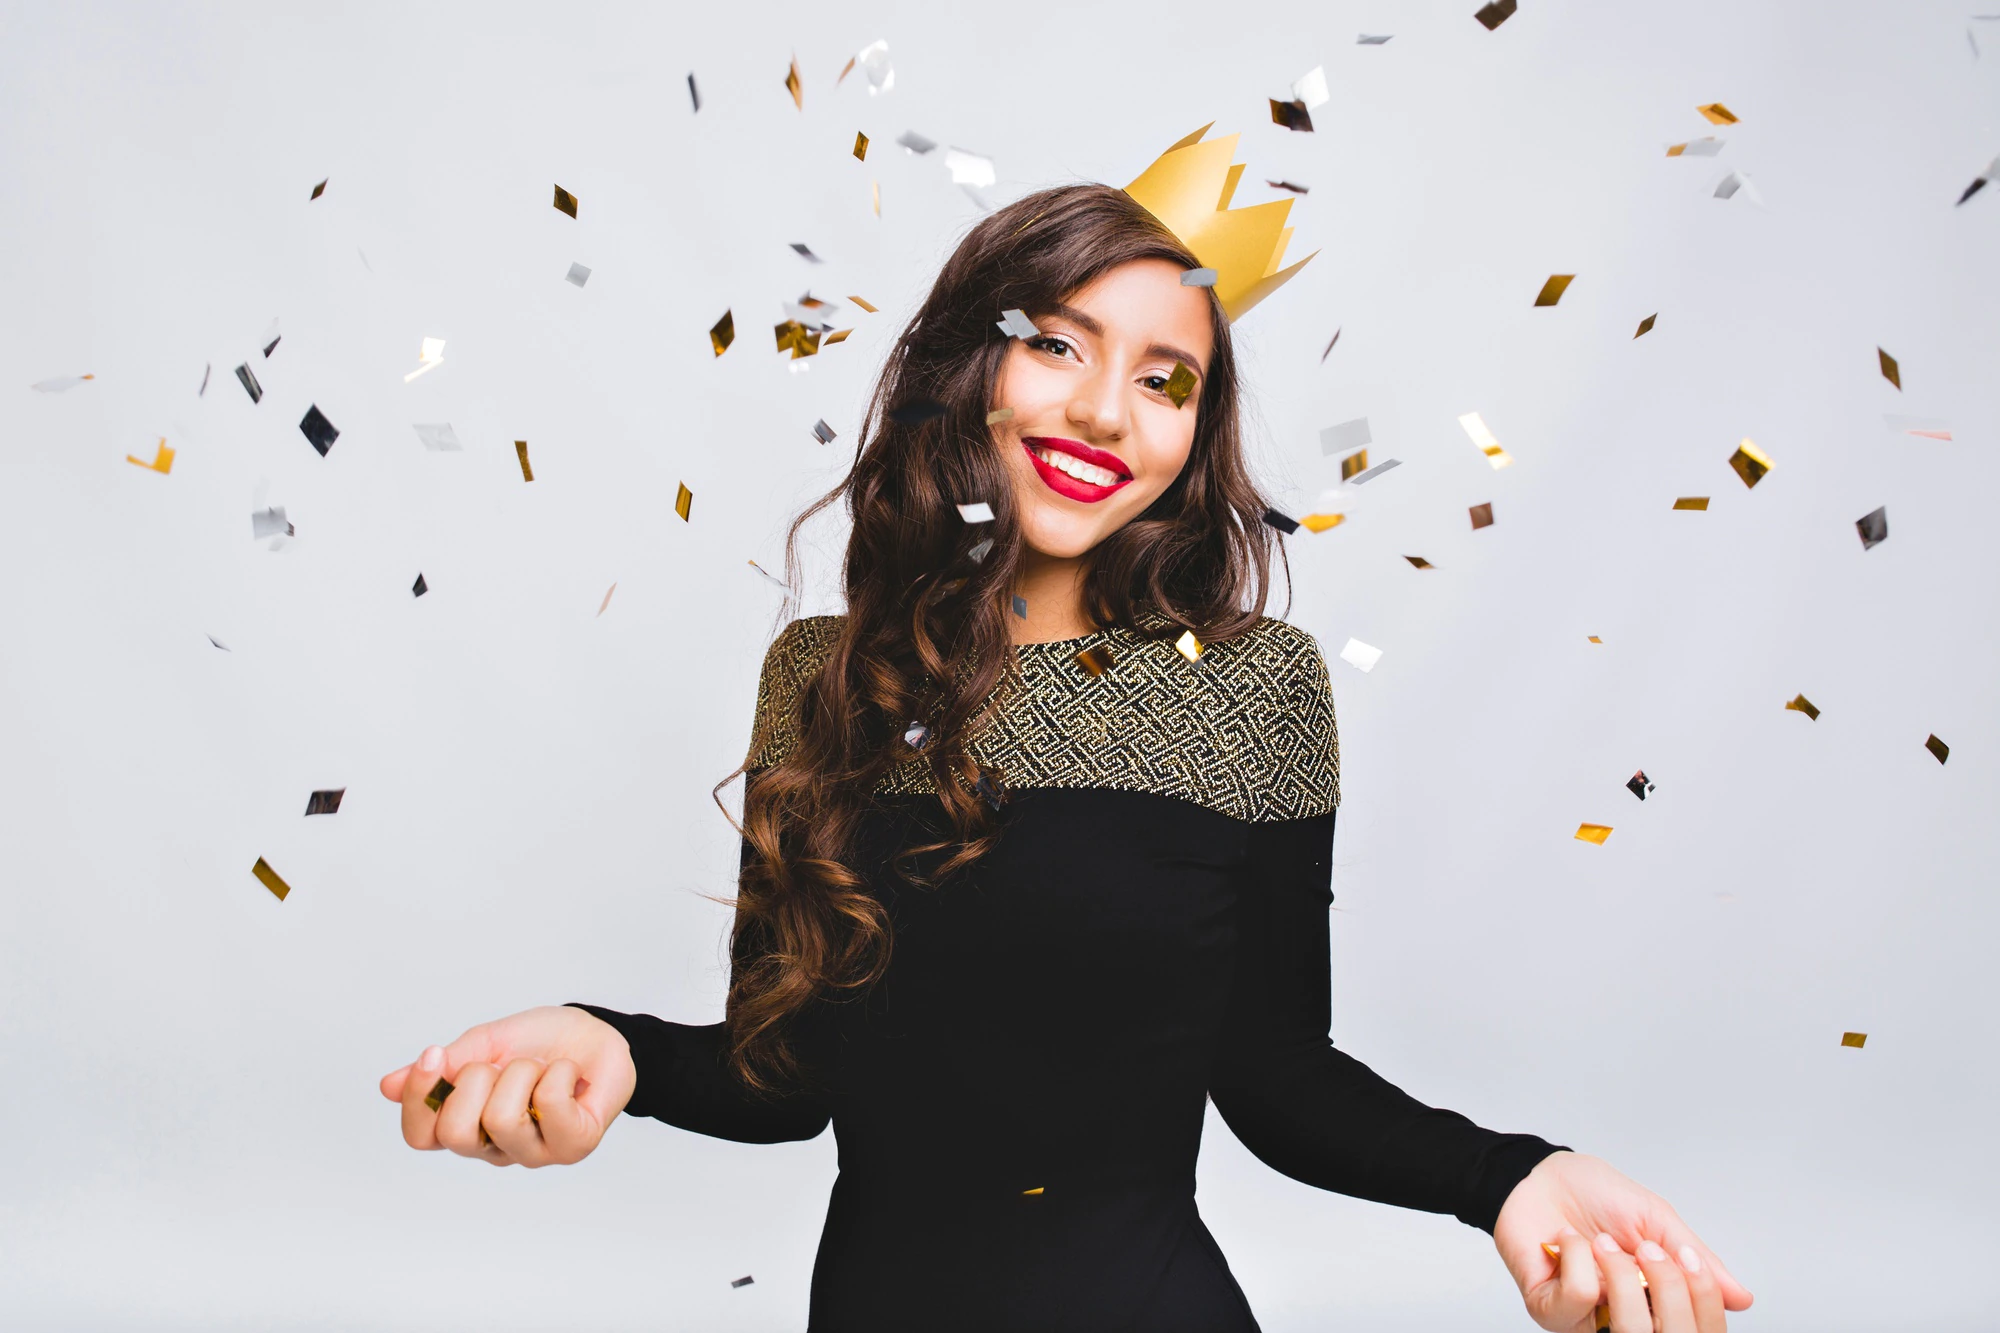 happy time young smiling woman celebrating new year wearing black dress and yellow crown happy carnival disco party sparkling confetti having fun smiling 197531 1346